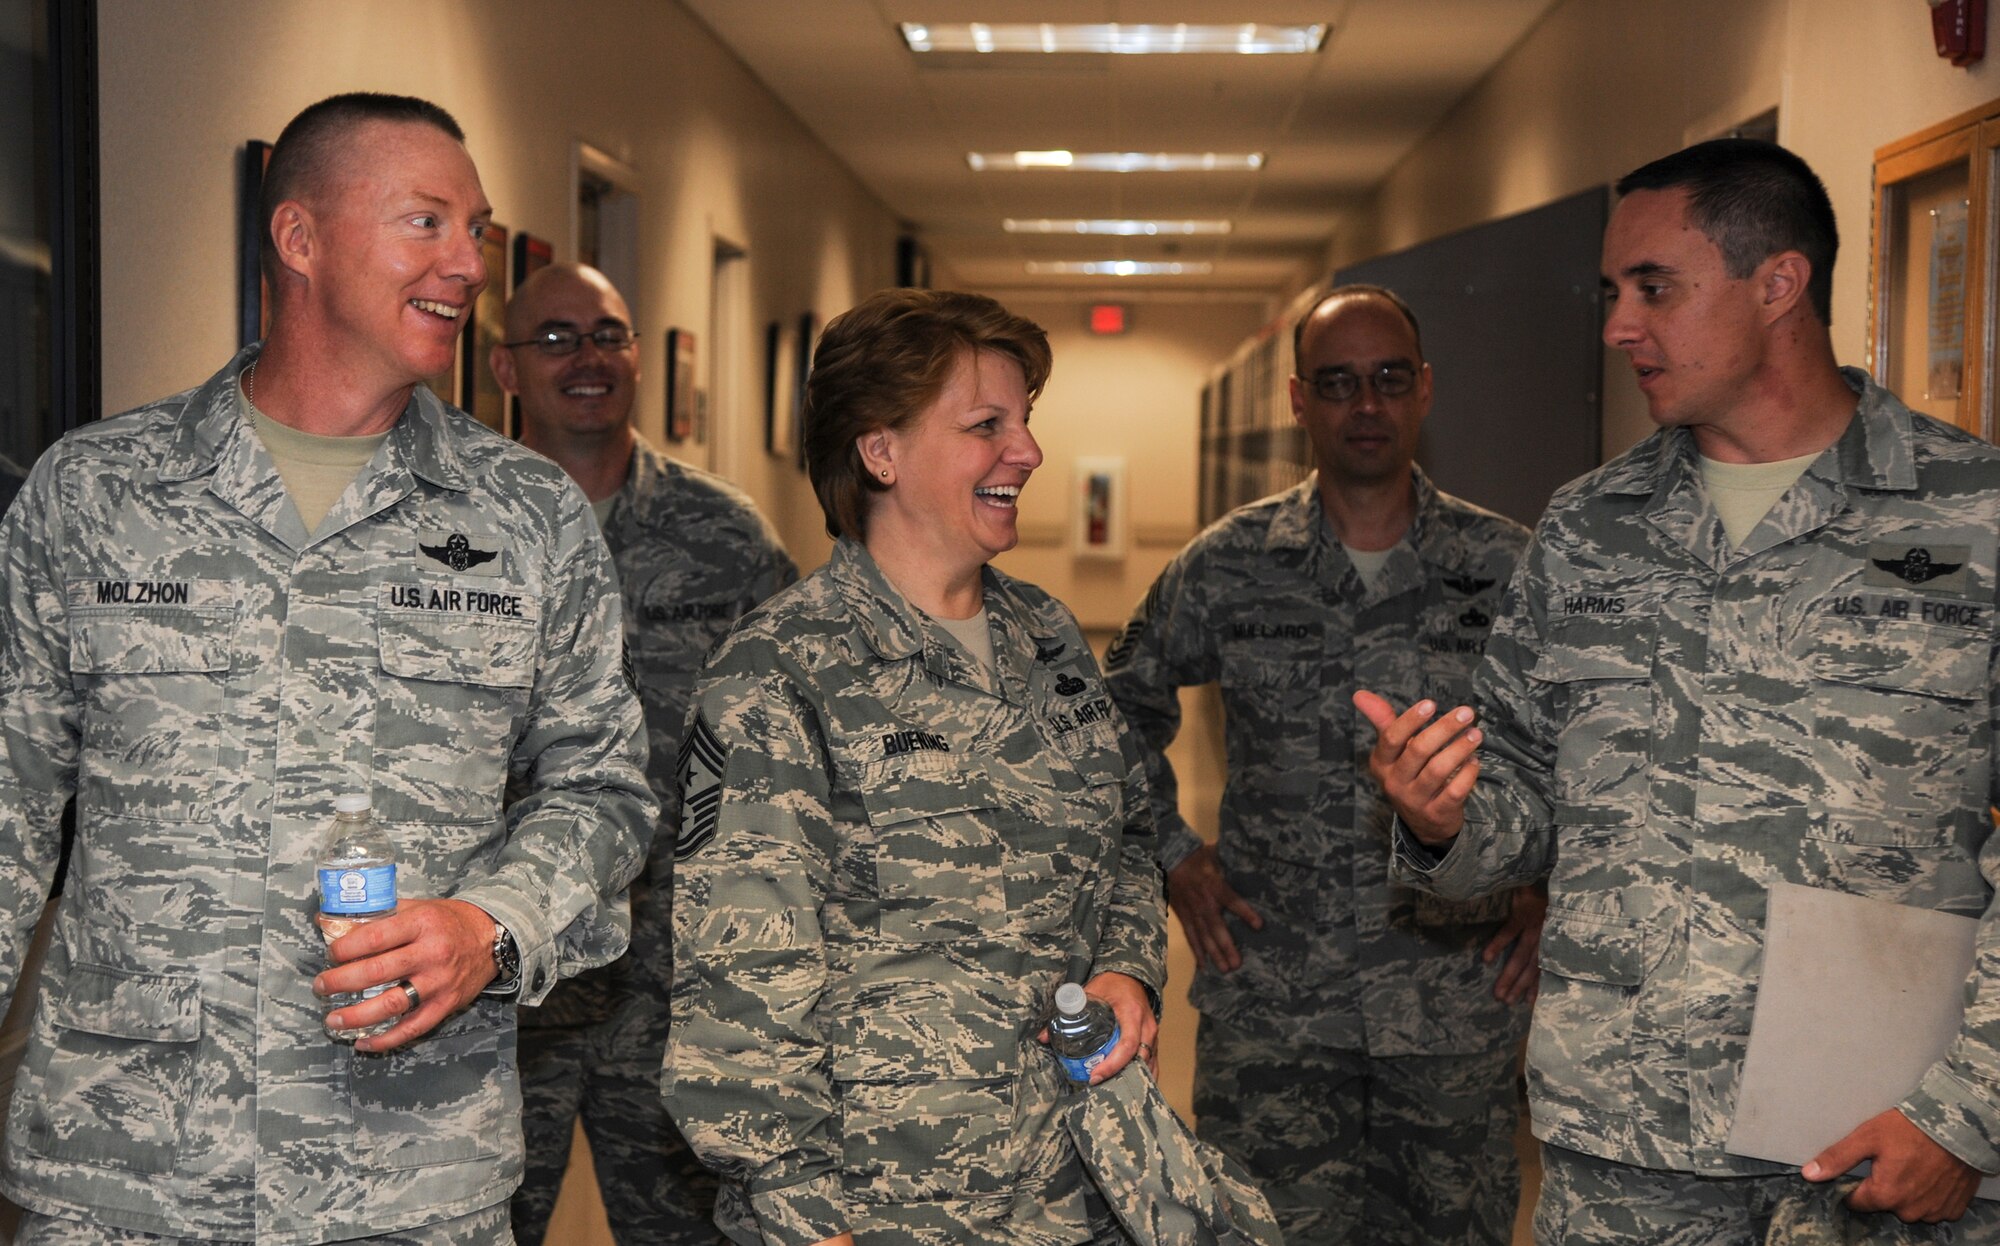 Chief Master Sgt. Rhonda Buening, 19th Airlift Wing command chief, takes a tour of the 50th Airlift Squadron June 3, 2014, at Little Rock Air Force Base, Ark. During her visit, Buening addressed concerns from loadmasters regarding manning issues. (U.S. Air Force photo by Airman 1st Class Harry Brexel)